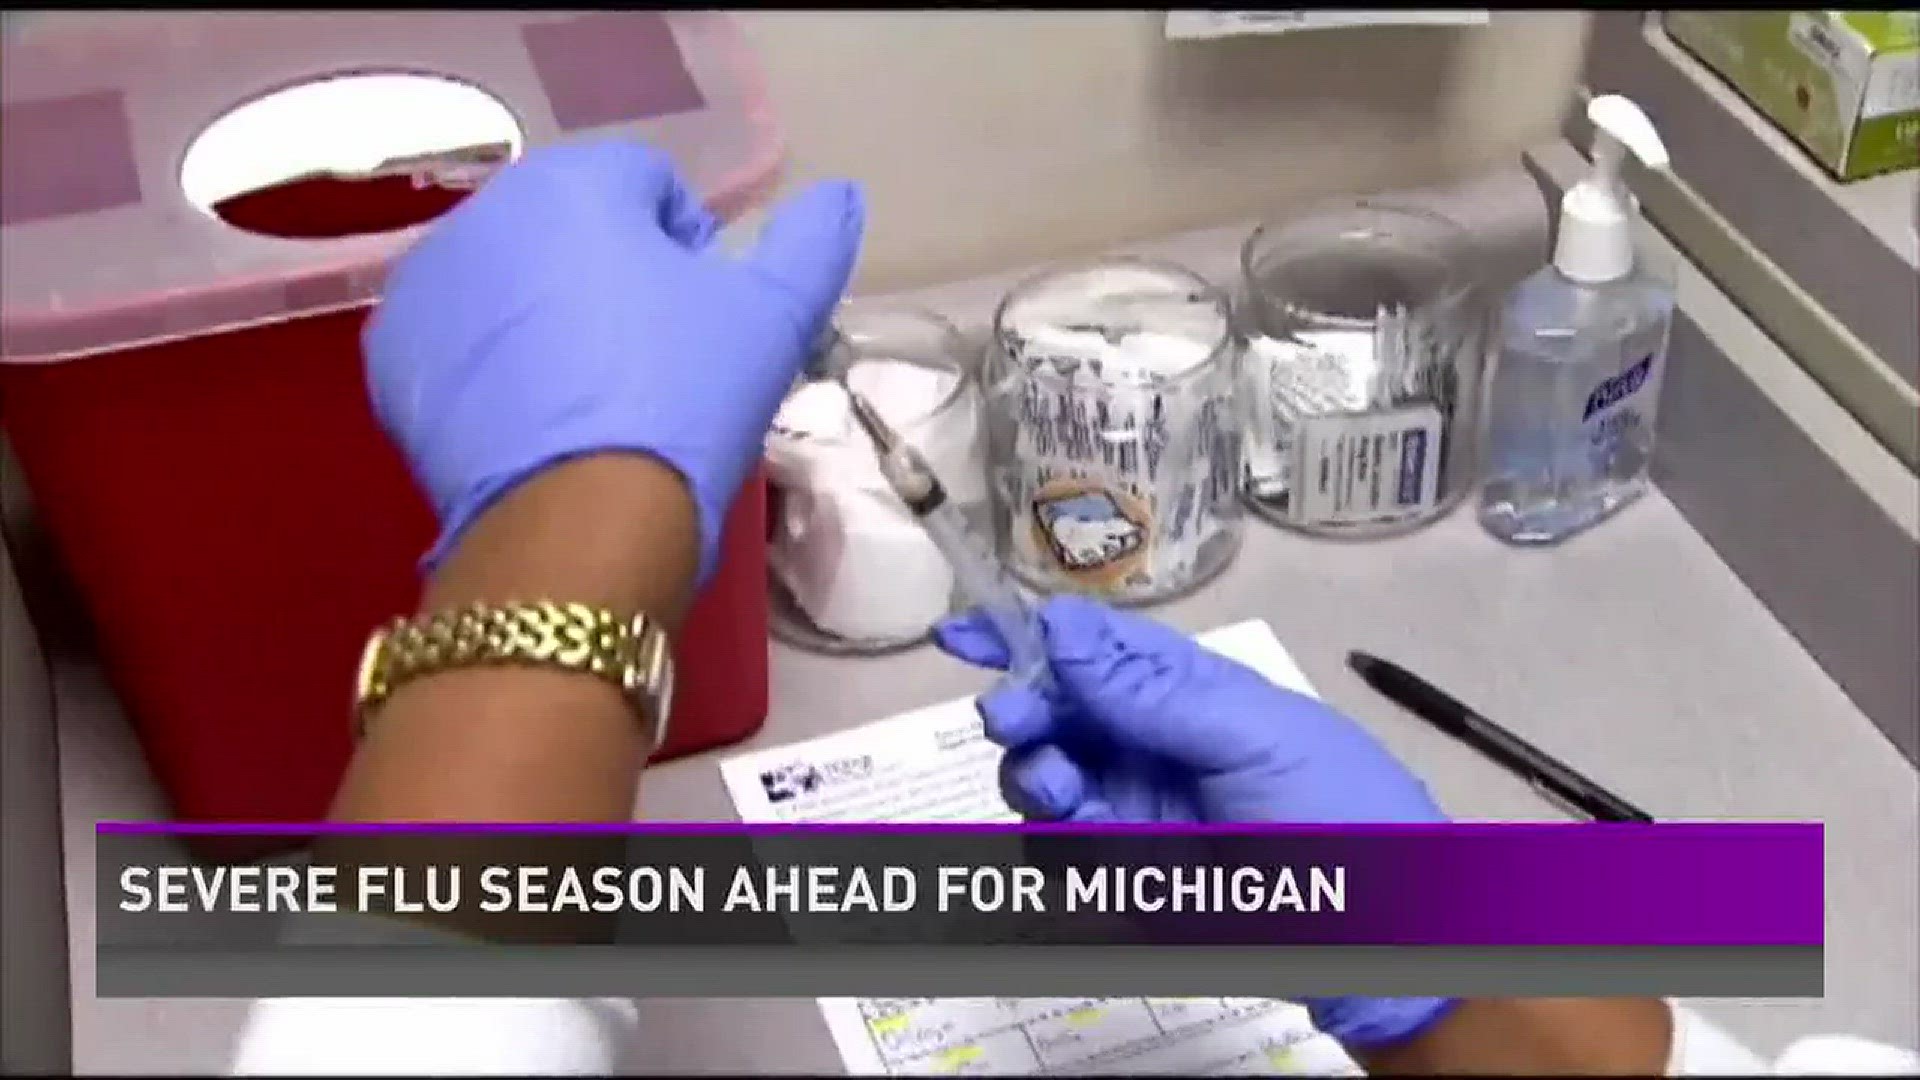 Flu season in Michigan is expected to be severe